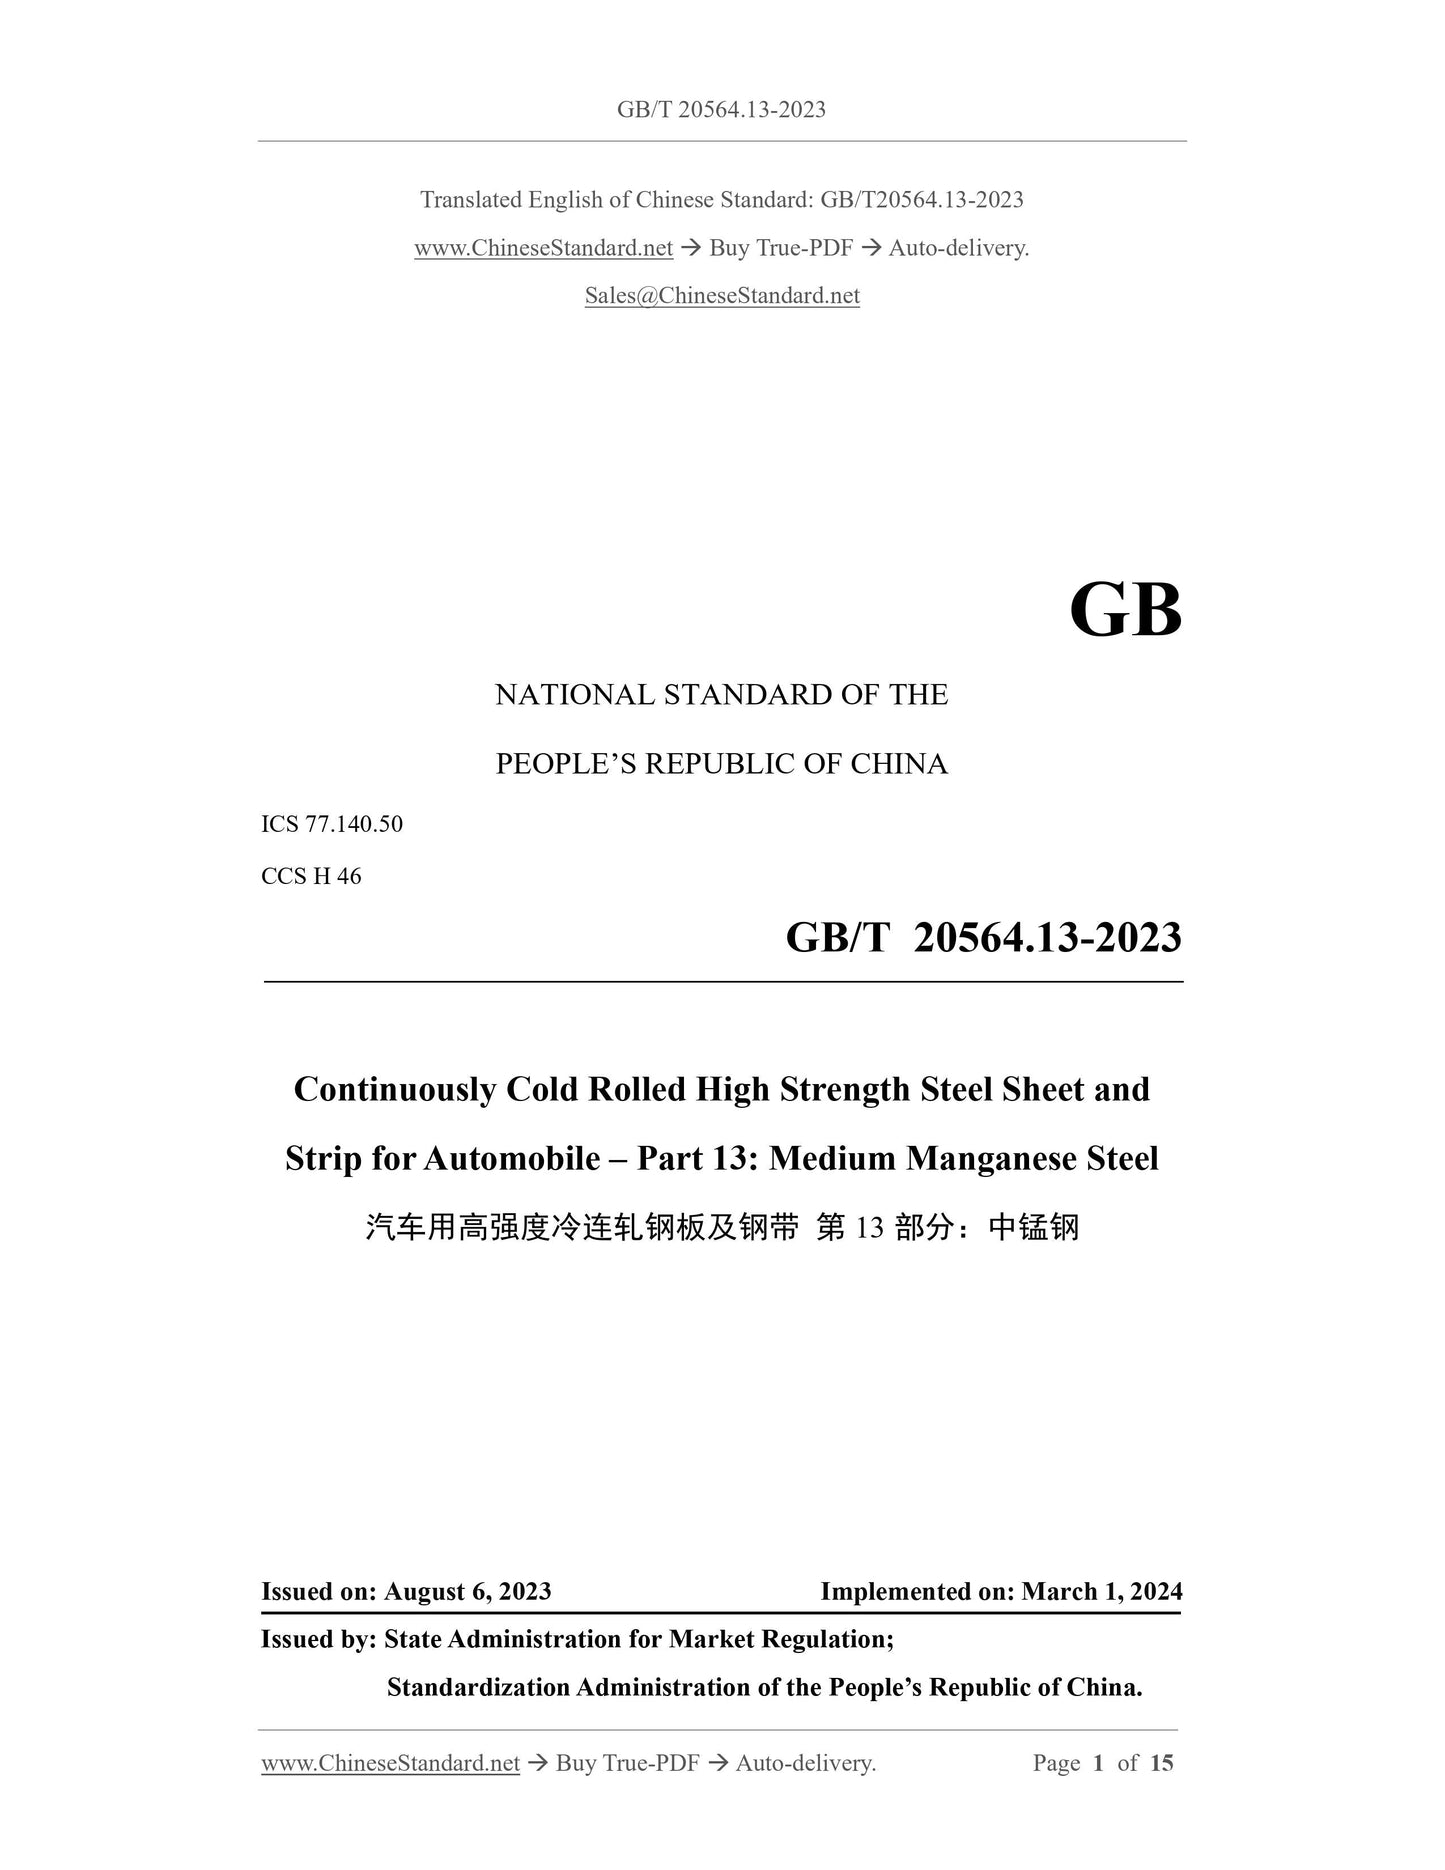 GB/T 20564.13-2023 Page 1